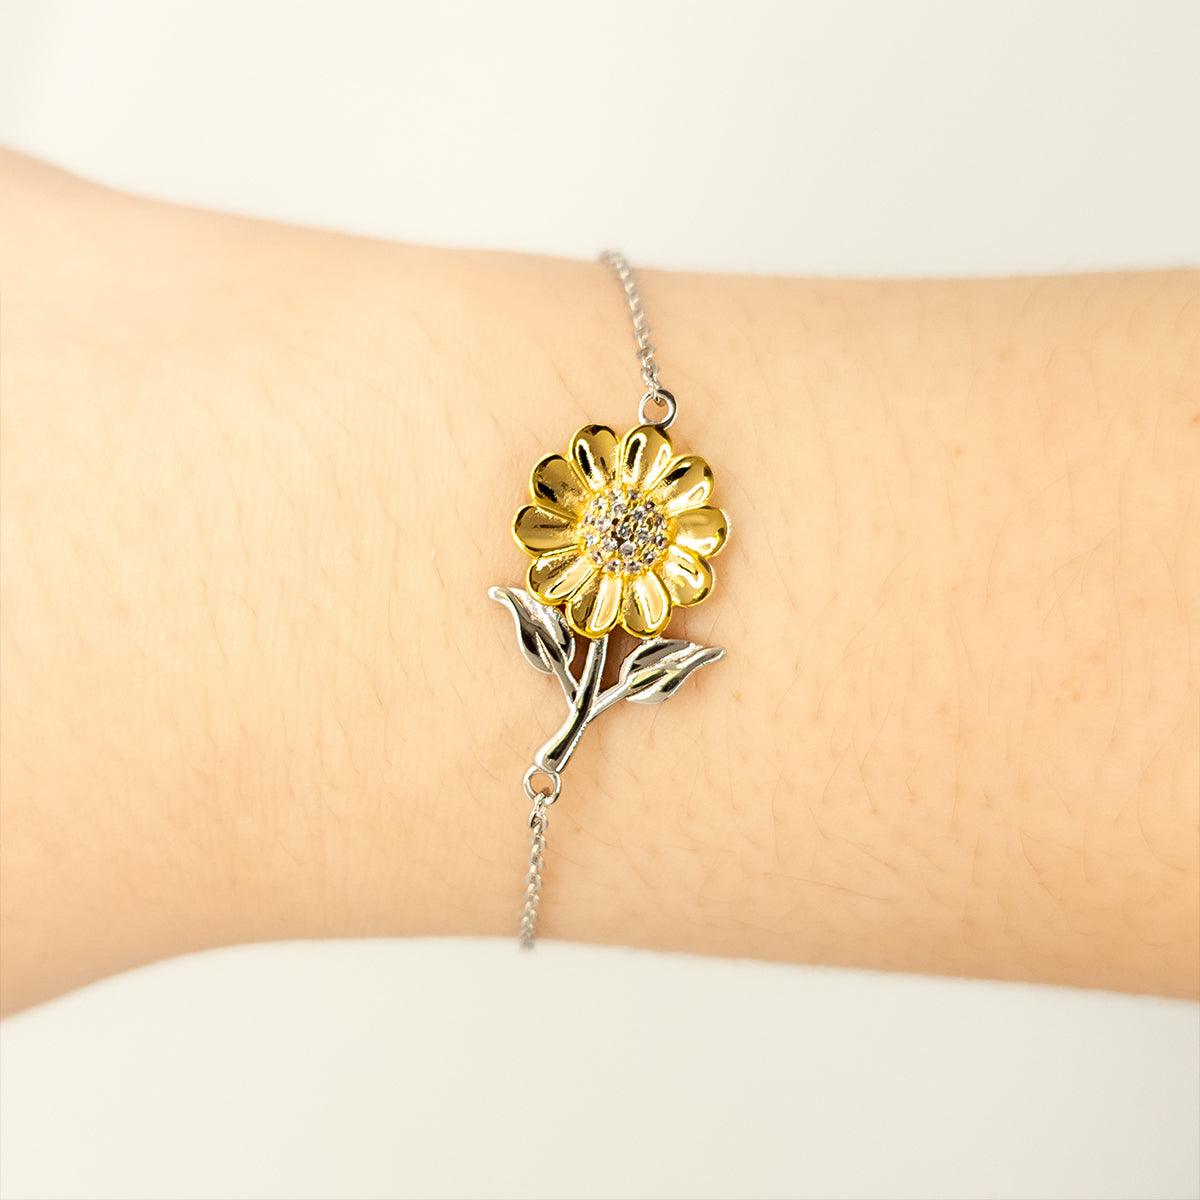 Pilot Sunflower Bracelet - Thanks for being who you are - Birthday Christmas Jewelry Gifts Coworkers Colleague Boss - Mallard Moon Gift Shop